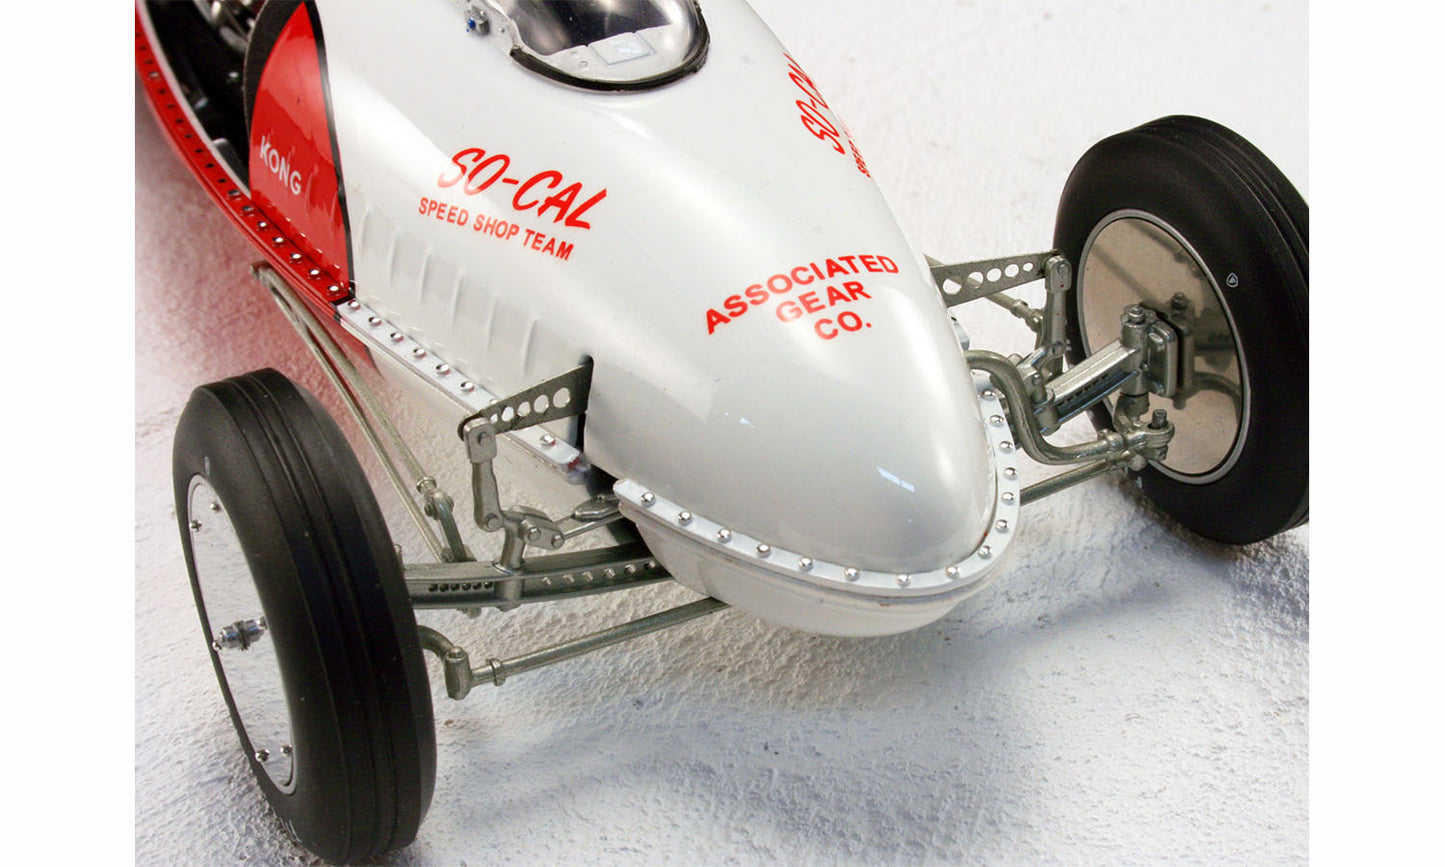 So Cal Speed Shop Belly Tank Racer